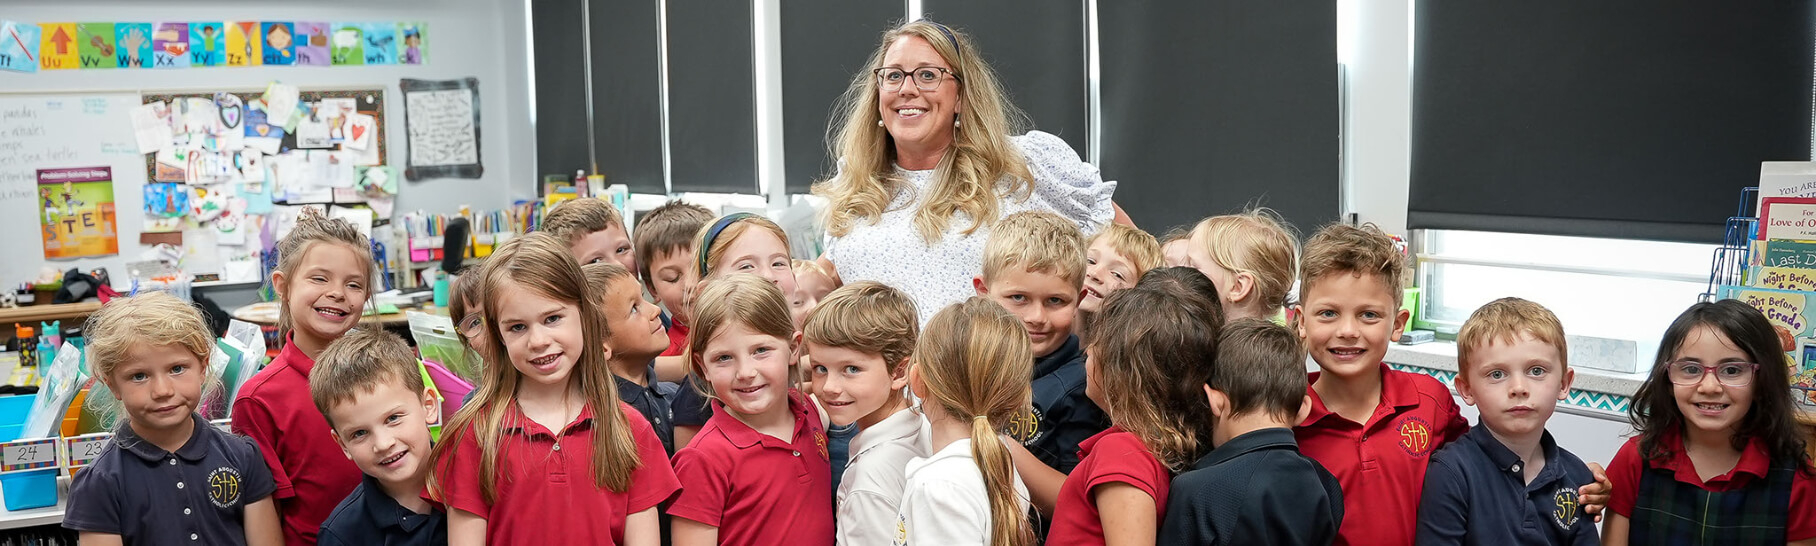 Angie Patti and her kindergarten students in the classroom